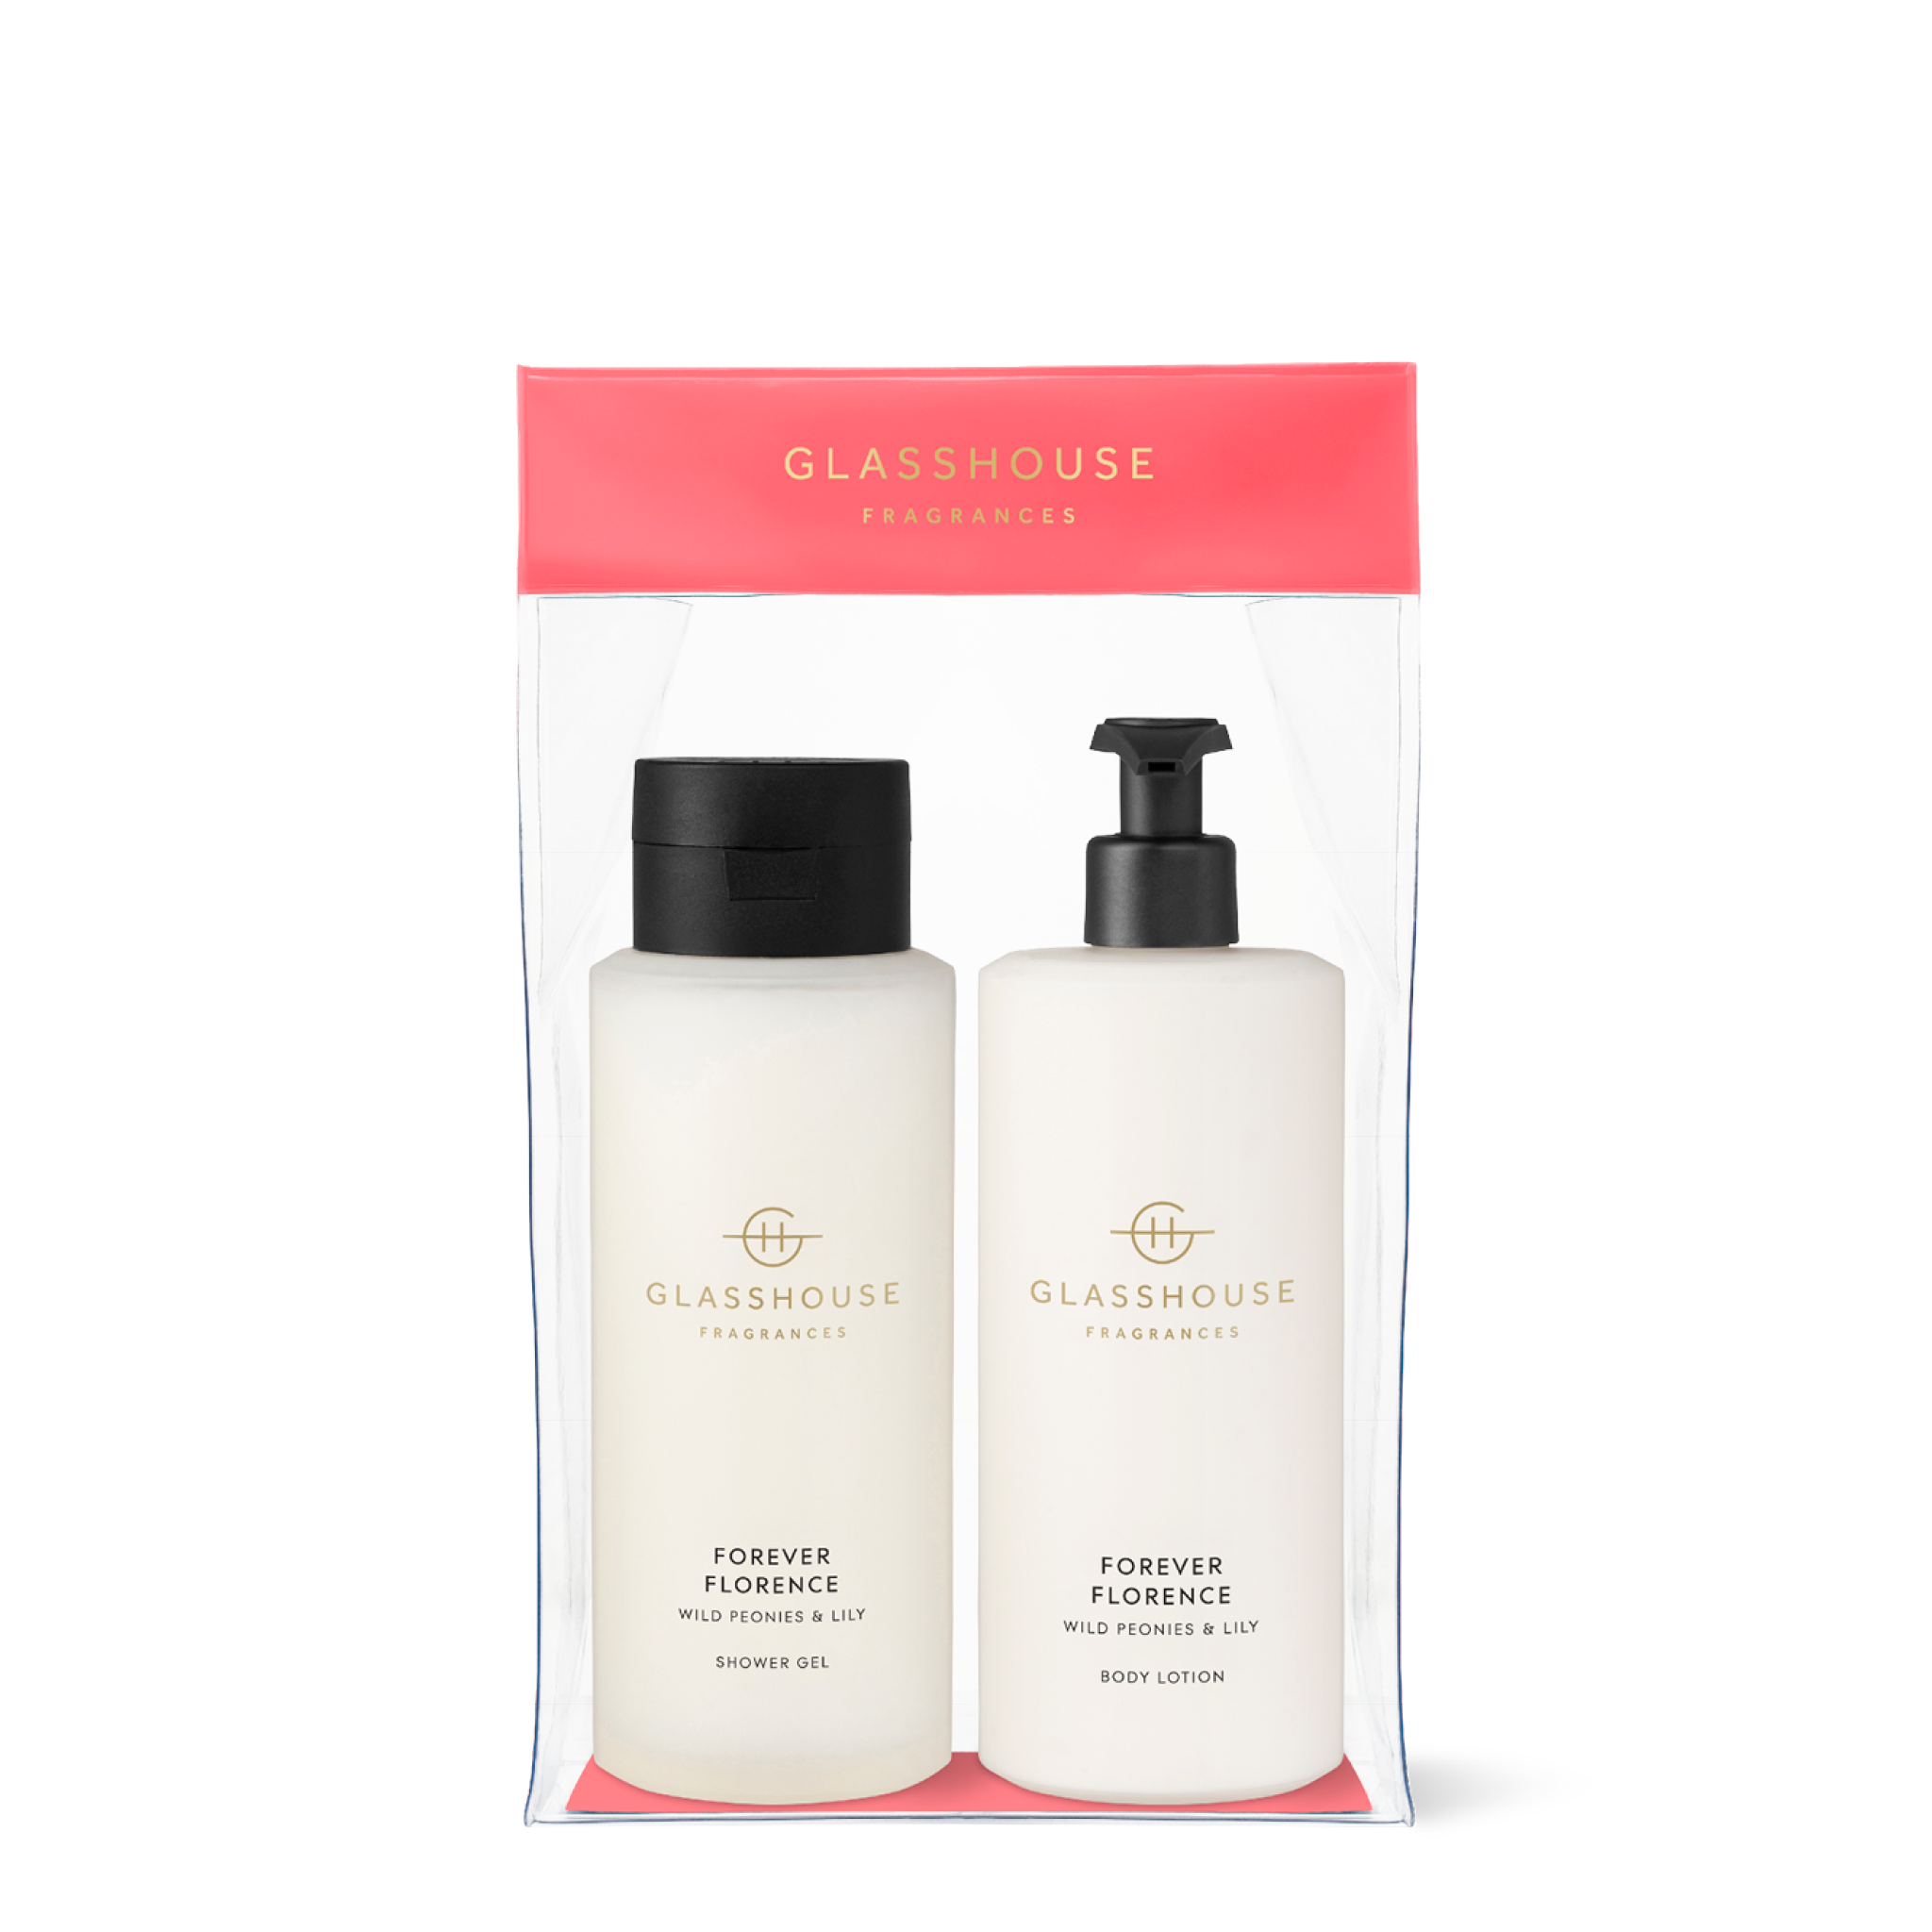 Glasshouse Fragrances Forever Florence Wild Peonies and Lily 400mL Body Lotion and Shower Gel in plastic case